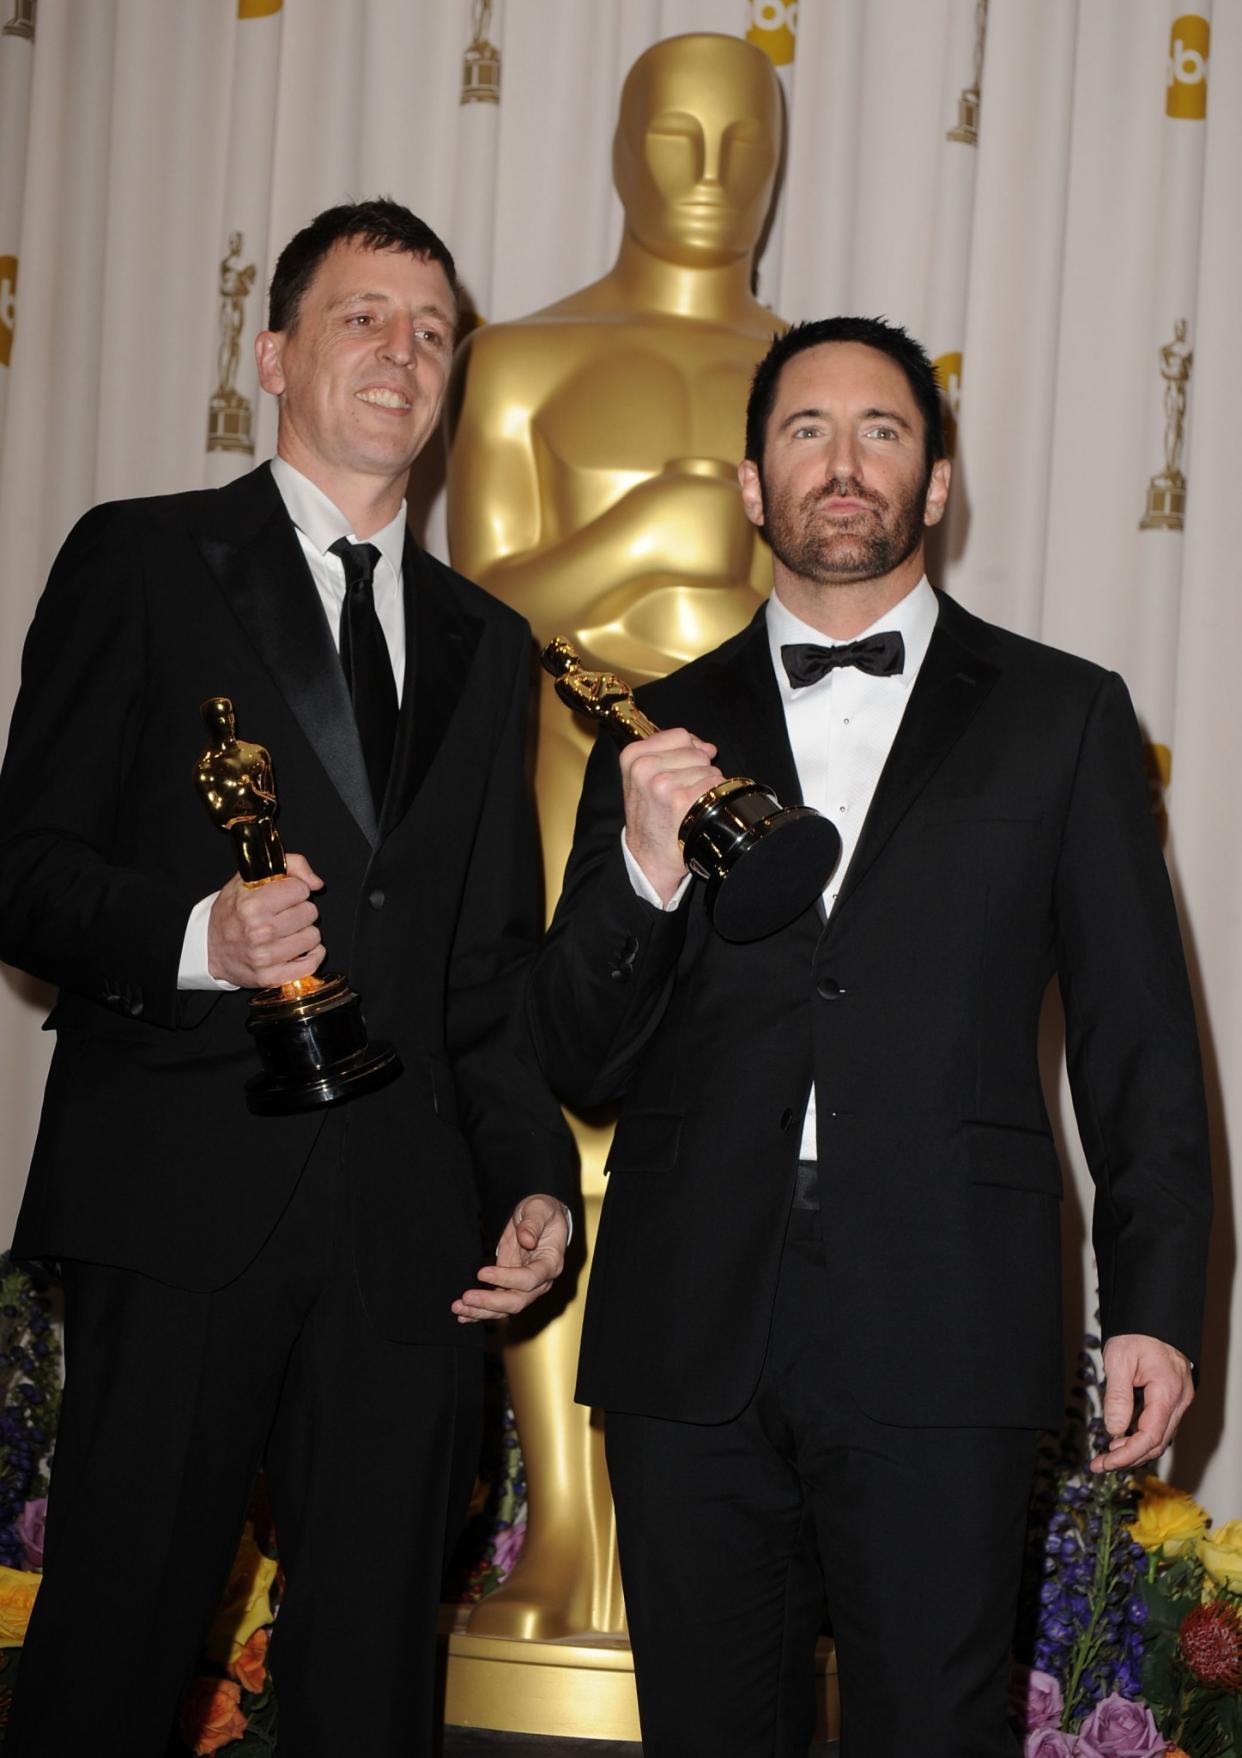 HOLLYWOOD, CA - FEBRUARY 27: Composers Atticus Ross (L) and Trent Reznor pose in the press room during the 83rd Annual Academy Awards held at the Kodak Theatre on February 27, 2011 in Hollywood, California. (Photo by Steve Granitz/WireImage)